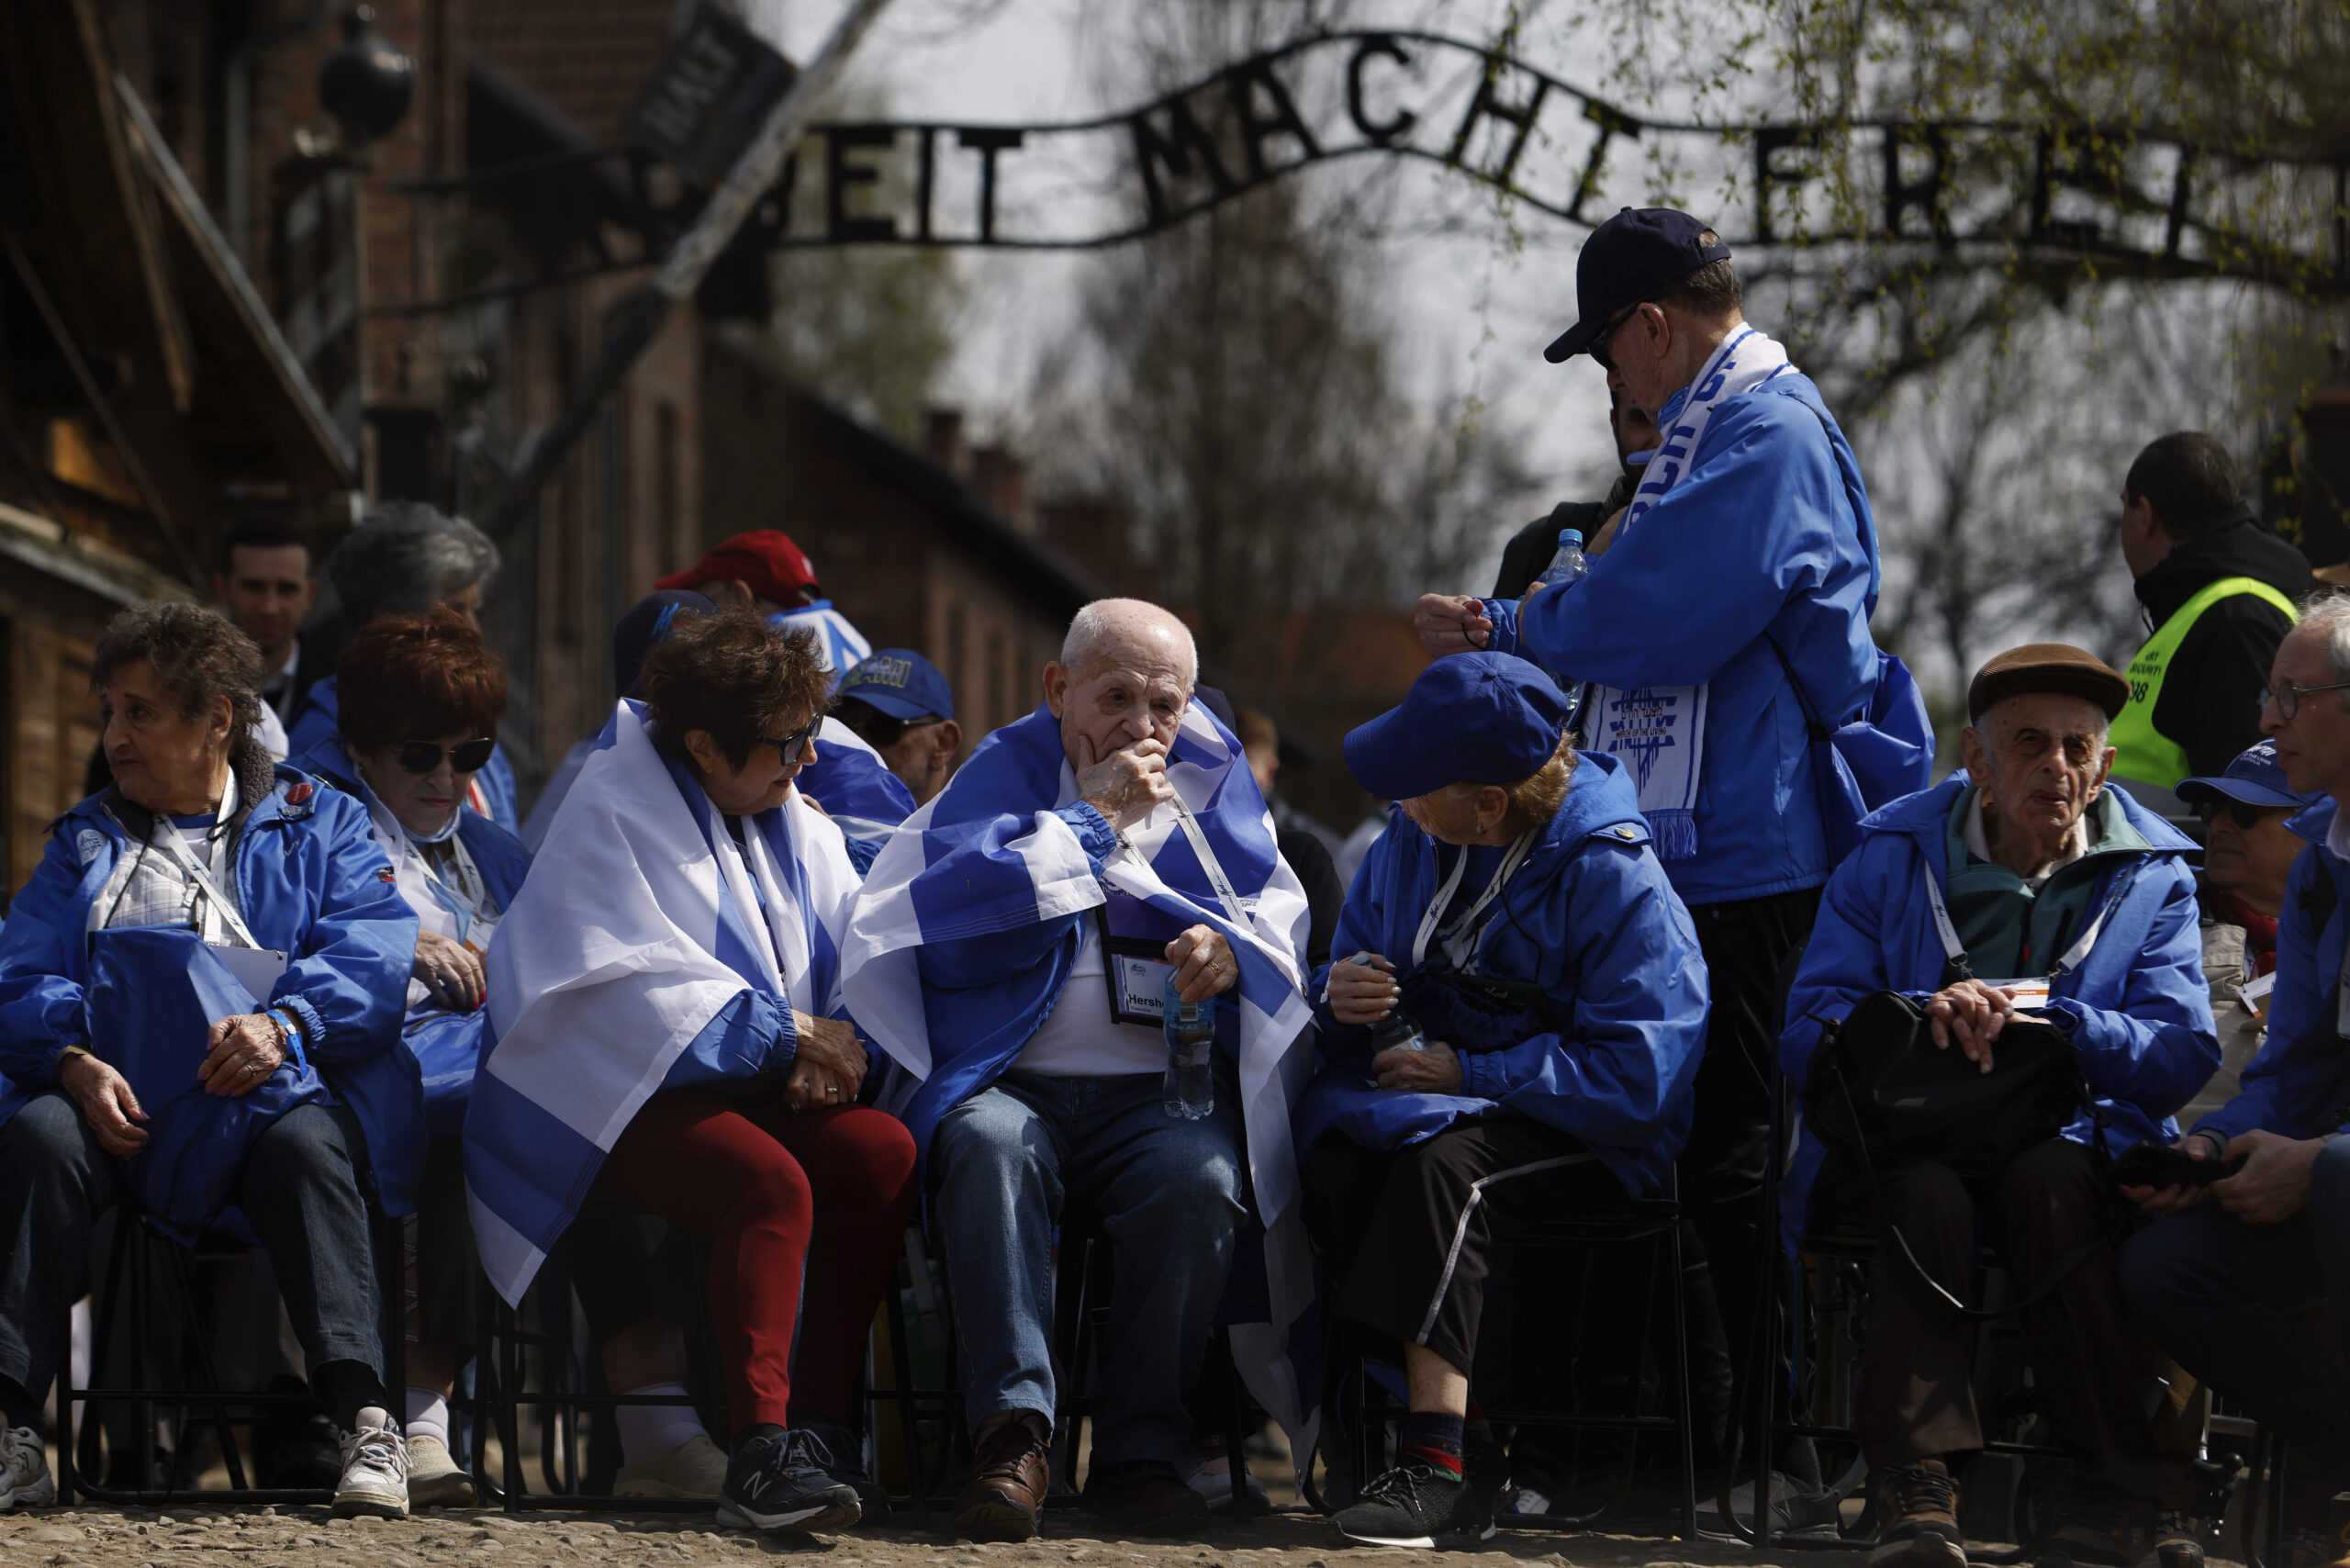 Holocaust survivors and former Auschwitz inmates participate in the annual 'March of the Living', a trek between two former Nazi-run death camps, in Oswiecim, Poland, Tuesday, April 18, 2023, to mourn victims of the Holocaust and celebrate the existence of the Jewish state. The infamous slogan in the background reads: 'Work Sets You Free'. (AP Photo/Michal Dyjuk)